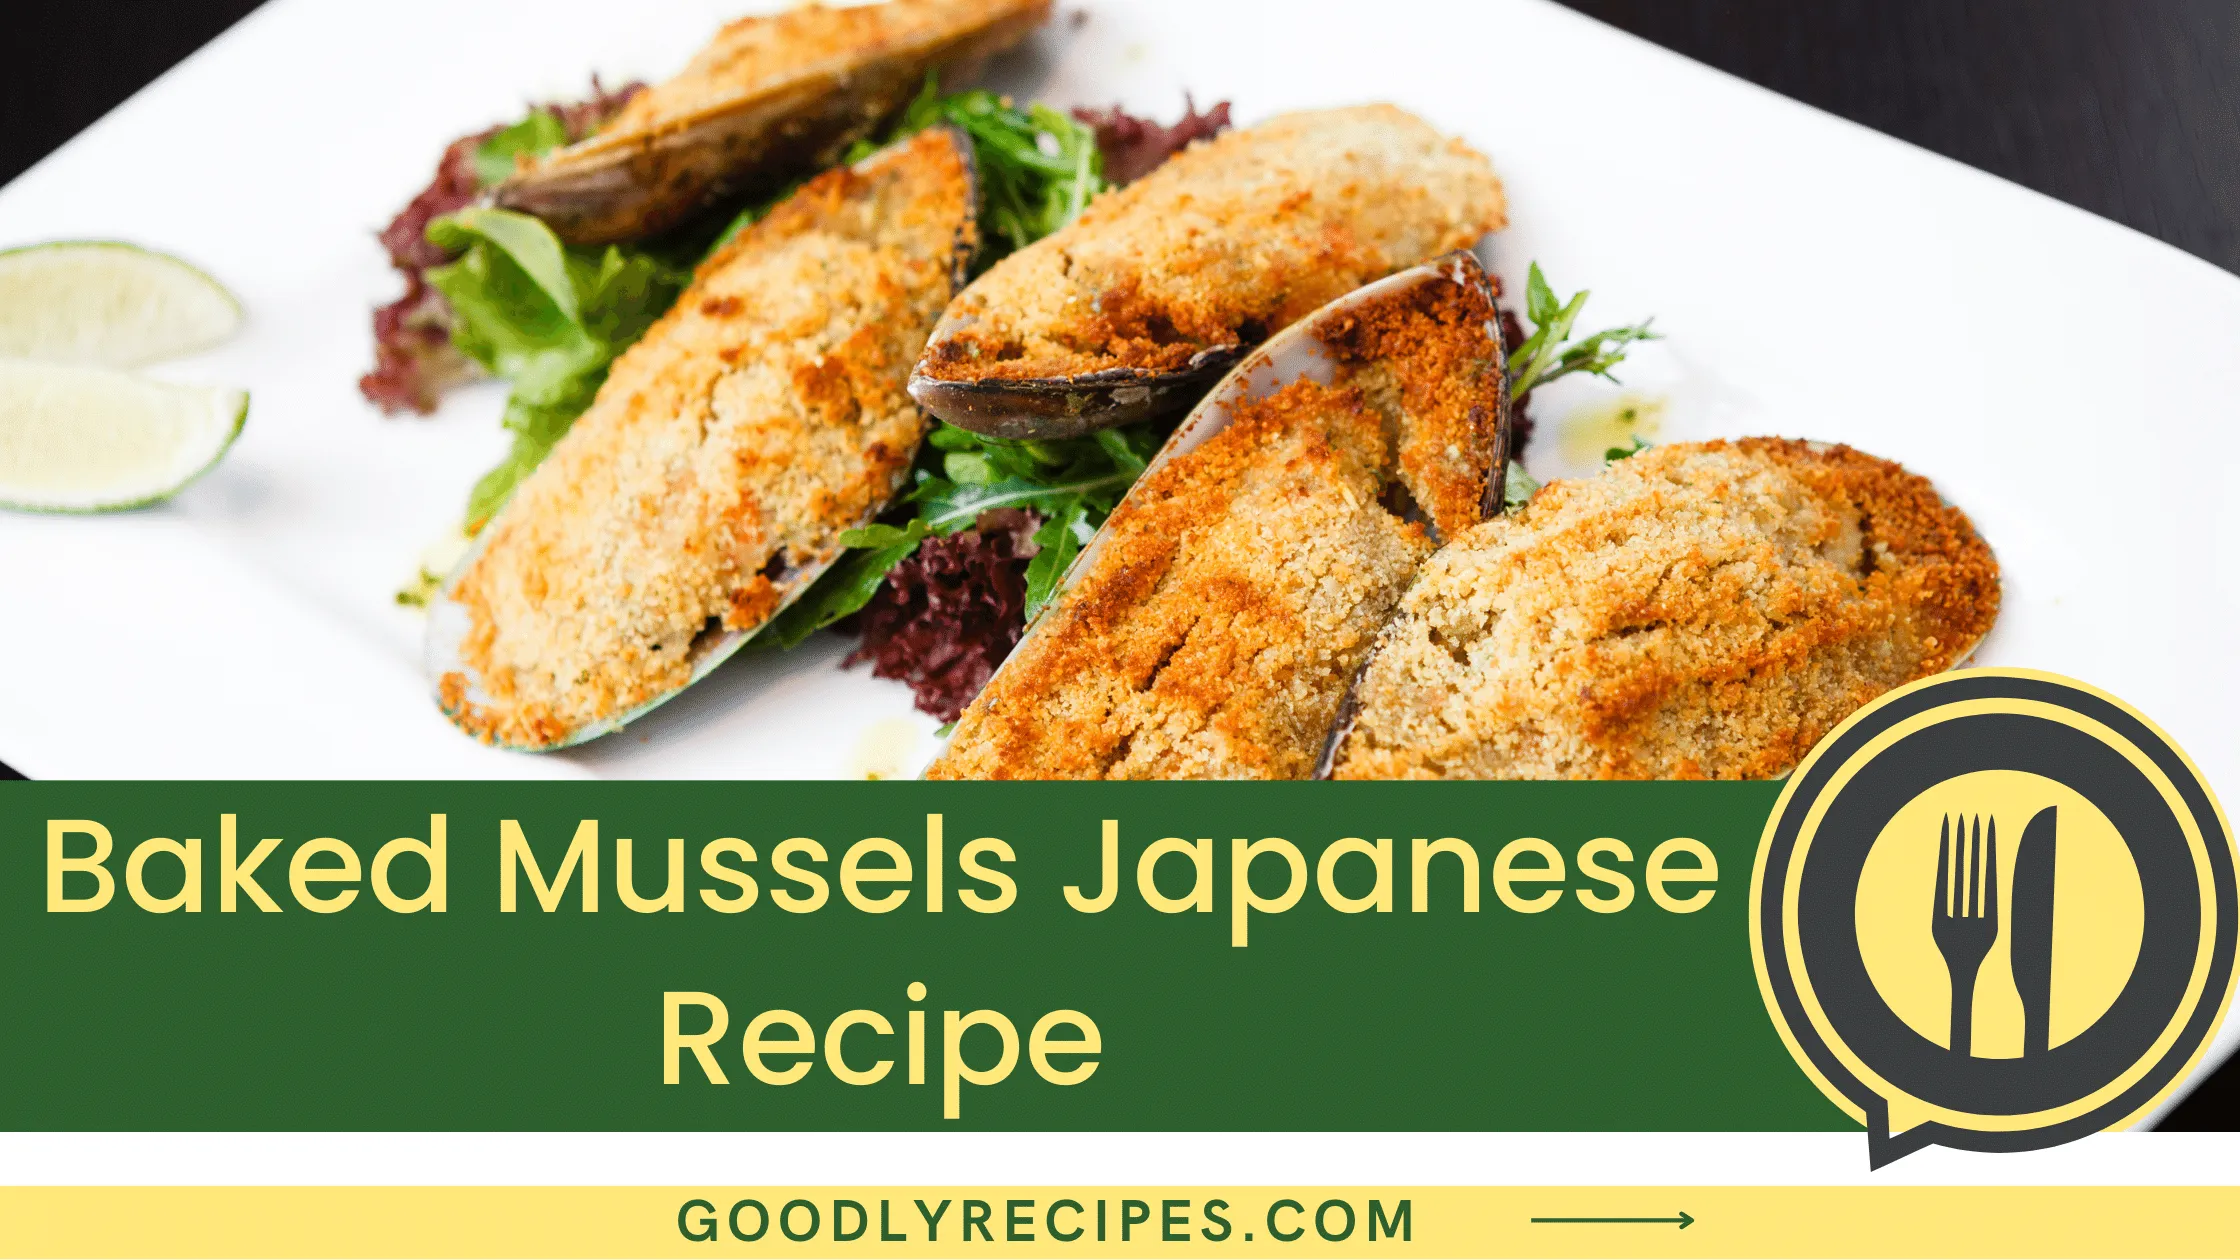 What is Baked Mussels Japanese?